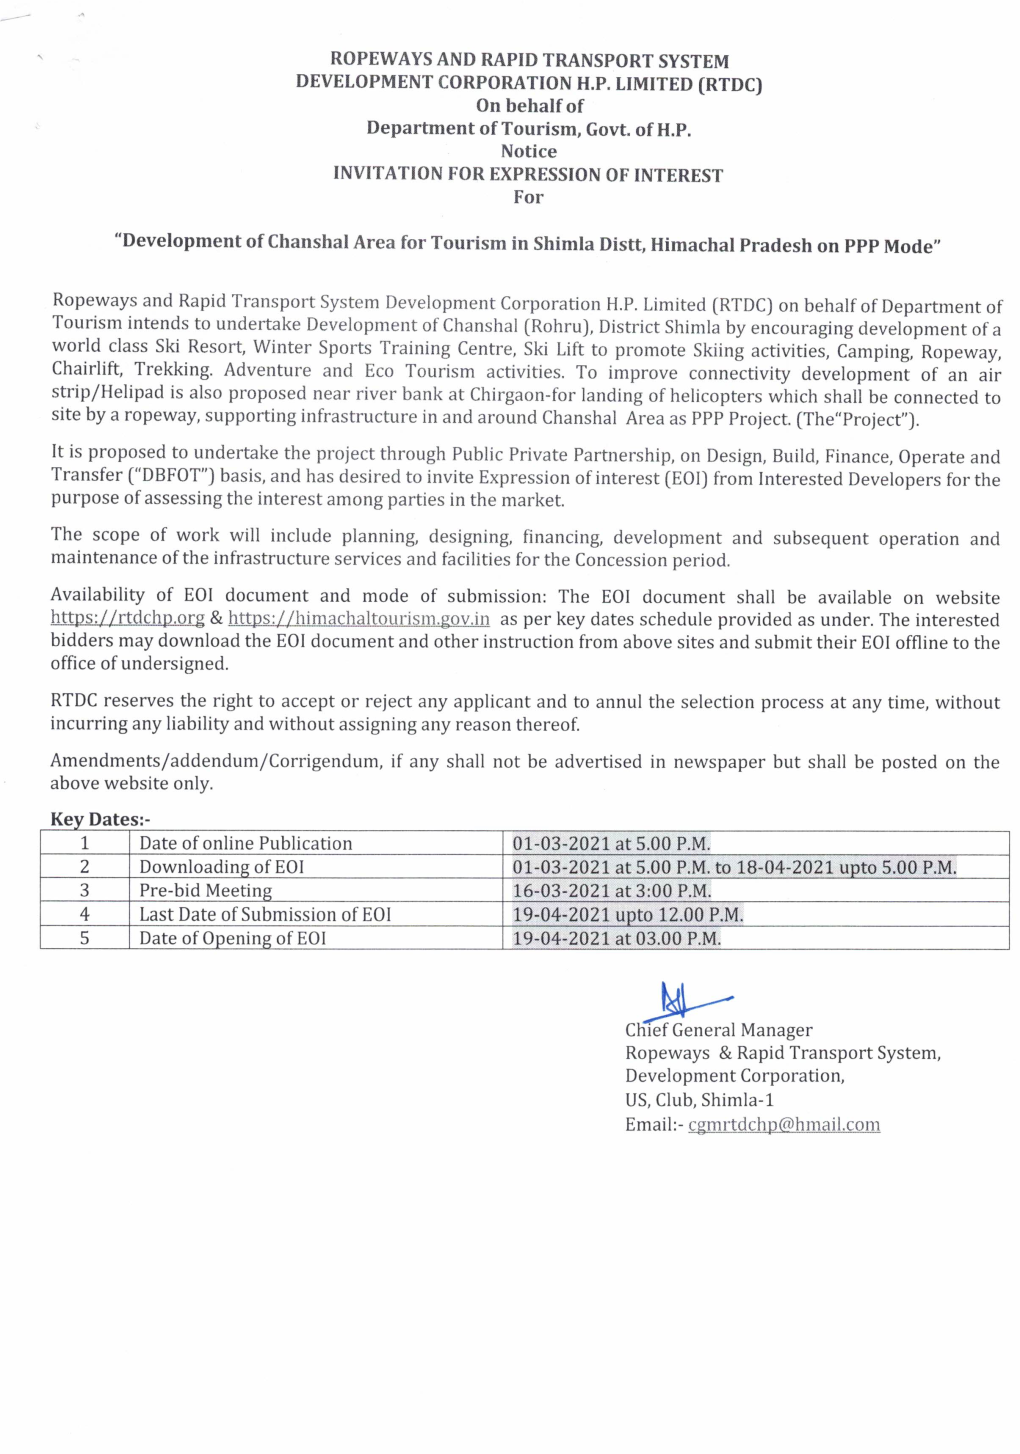 EOI & Inception Report for Development of Chanshal Area